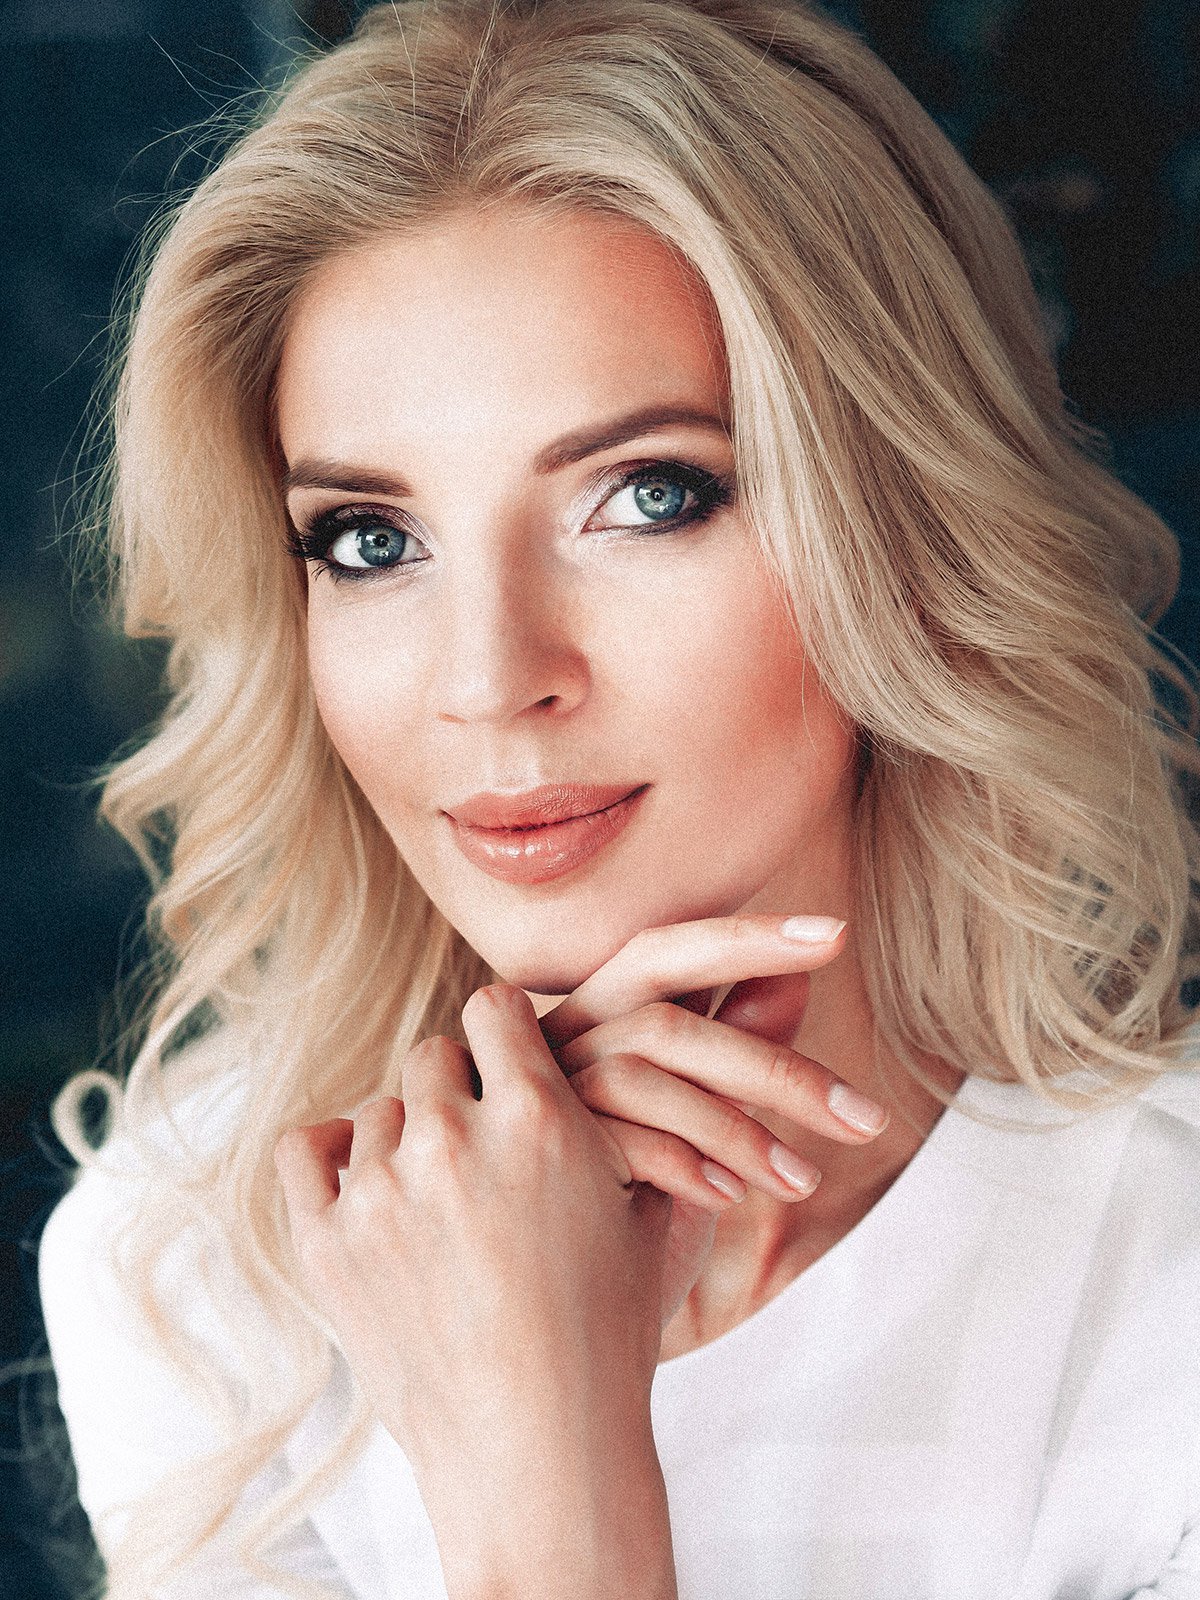 blonde facelift patient model with her hand under her chin smiling softly